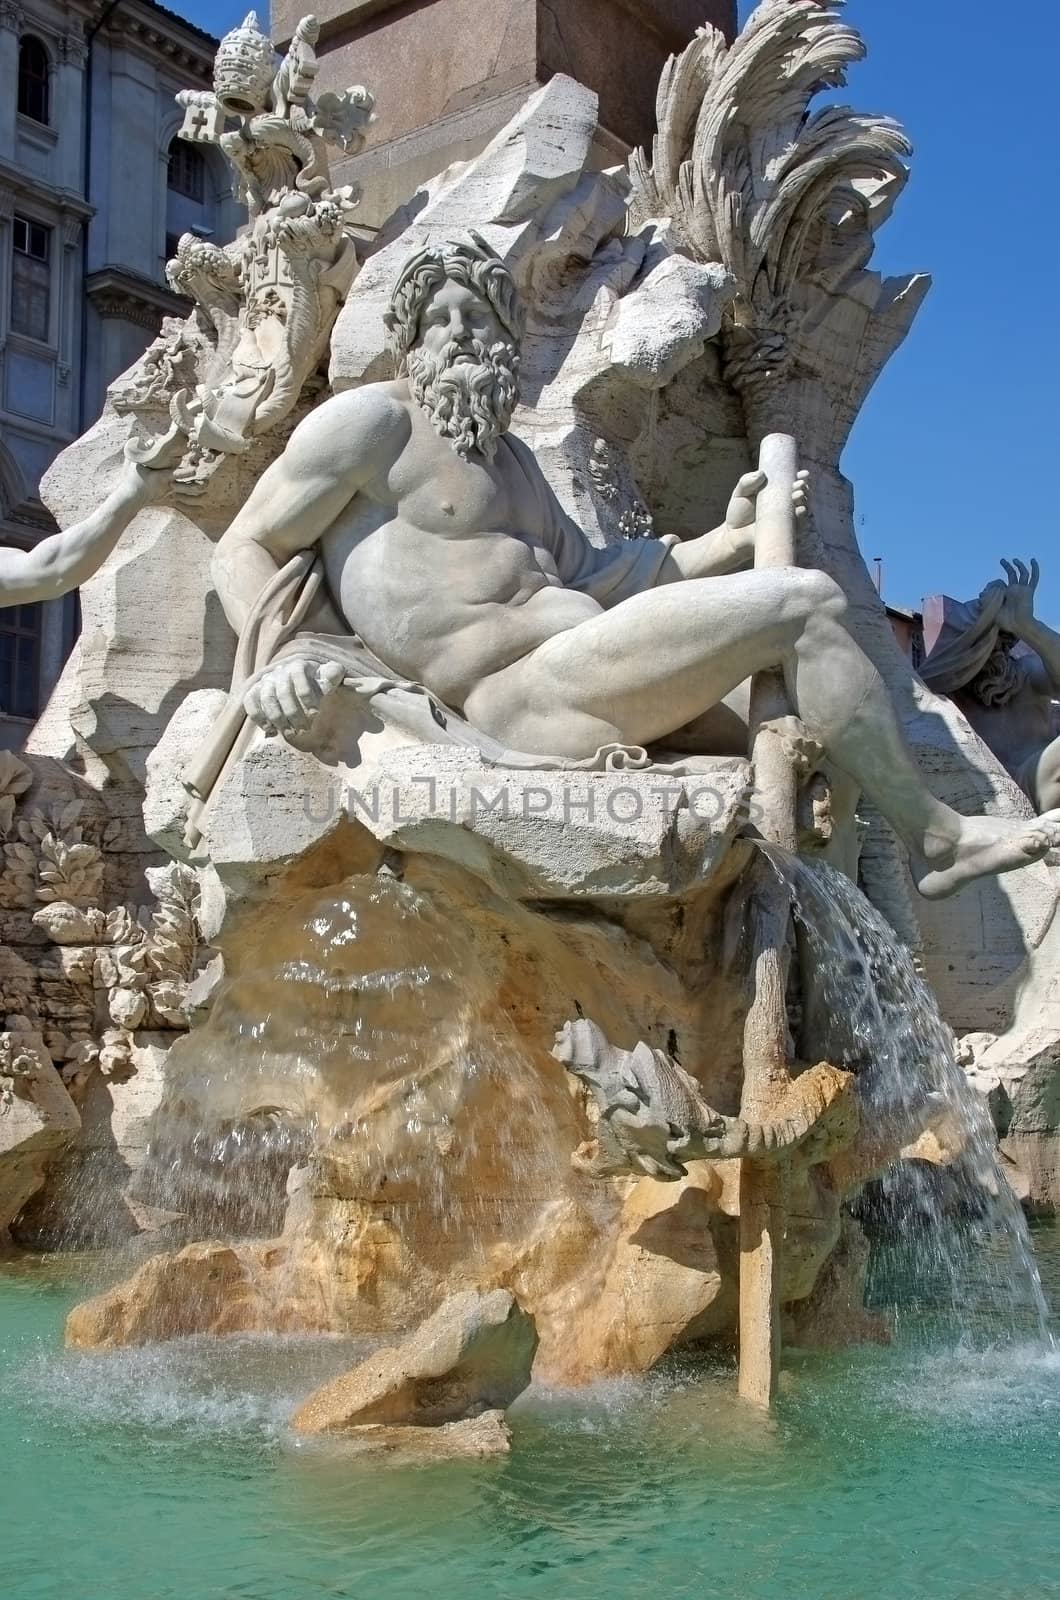 Fountain of the four rivers in Navonna Square, Rome